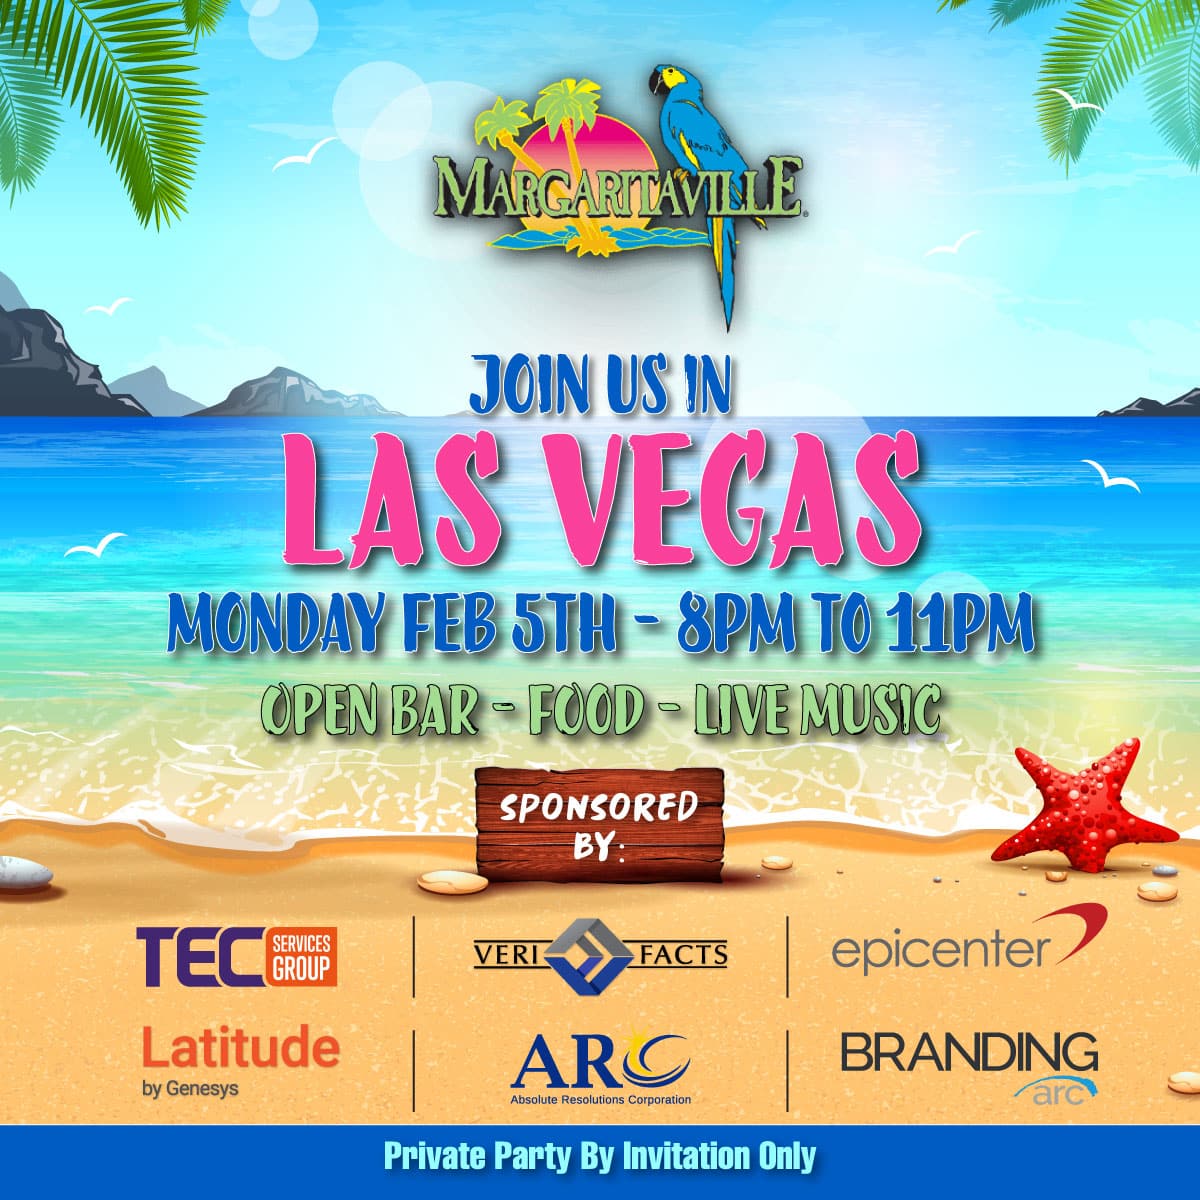 Join us in Las Vegas, Monday Feb 5th from 8pm to 11pm for open bar, food and live music, hosted by Adam Parks and Ed Forbes.